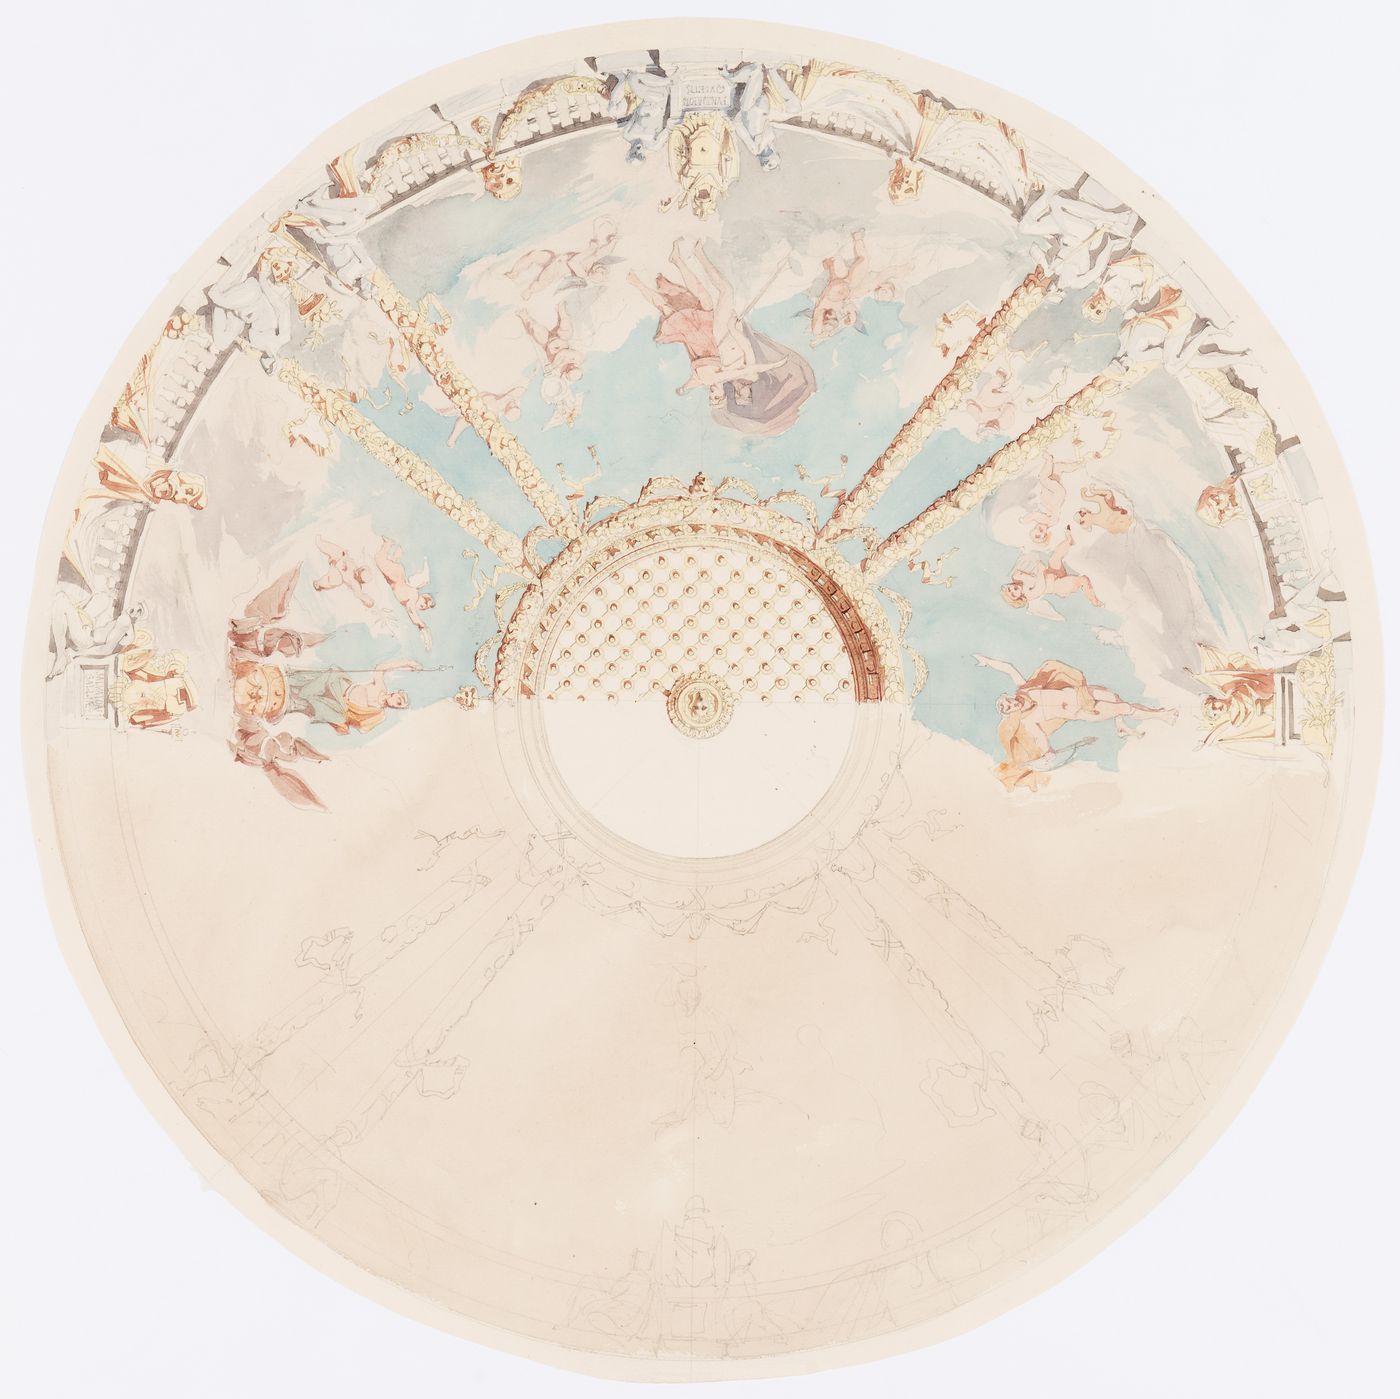 Project for an opera house for the Théâtre impérial de l'opéra: Reflected ceiling plan for the auditorium showing the trompe-l'oeil decoration